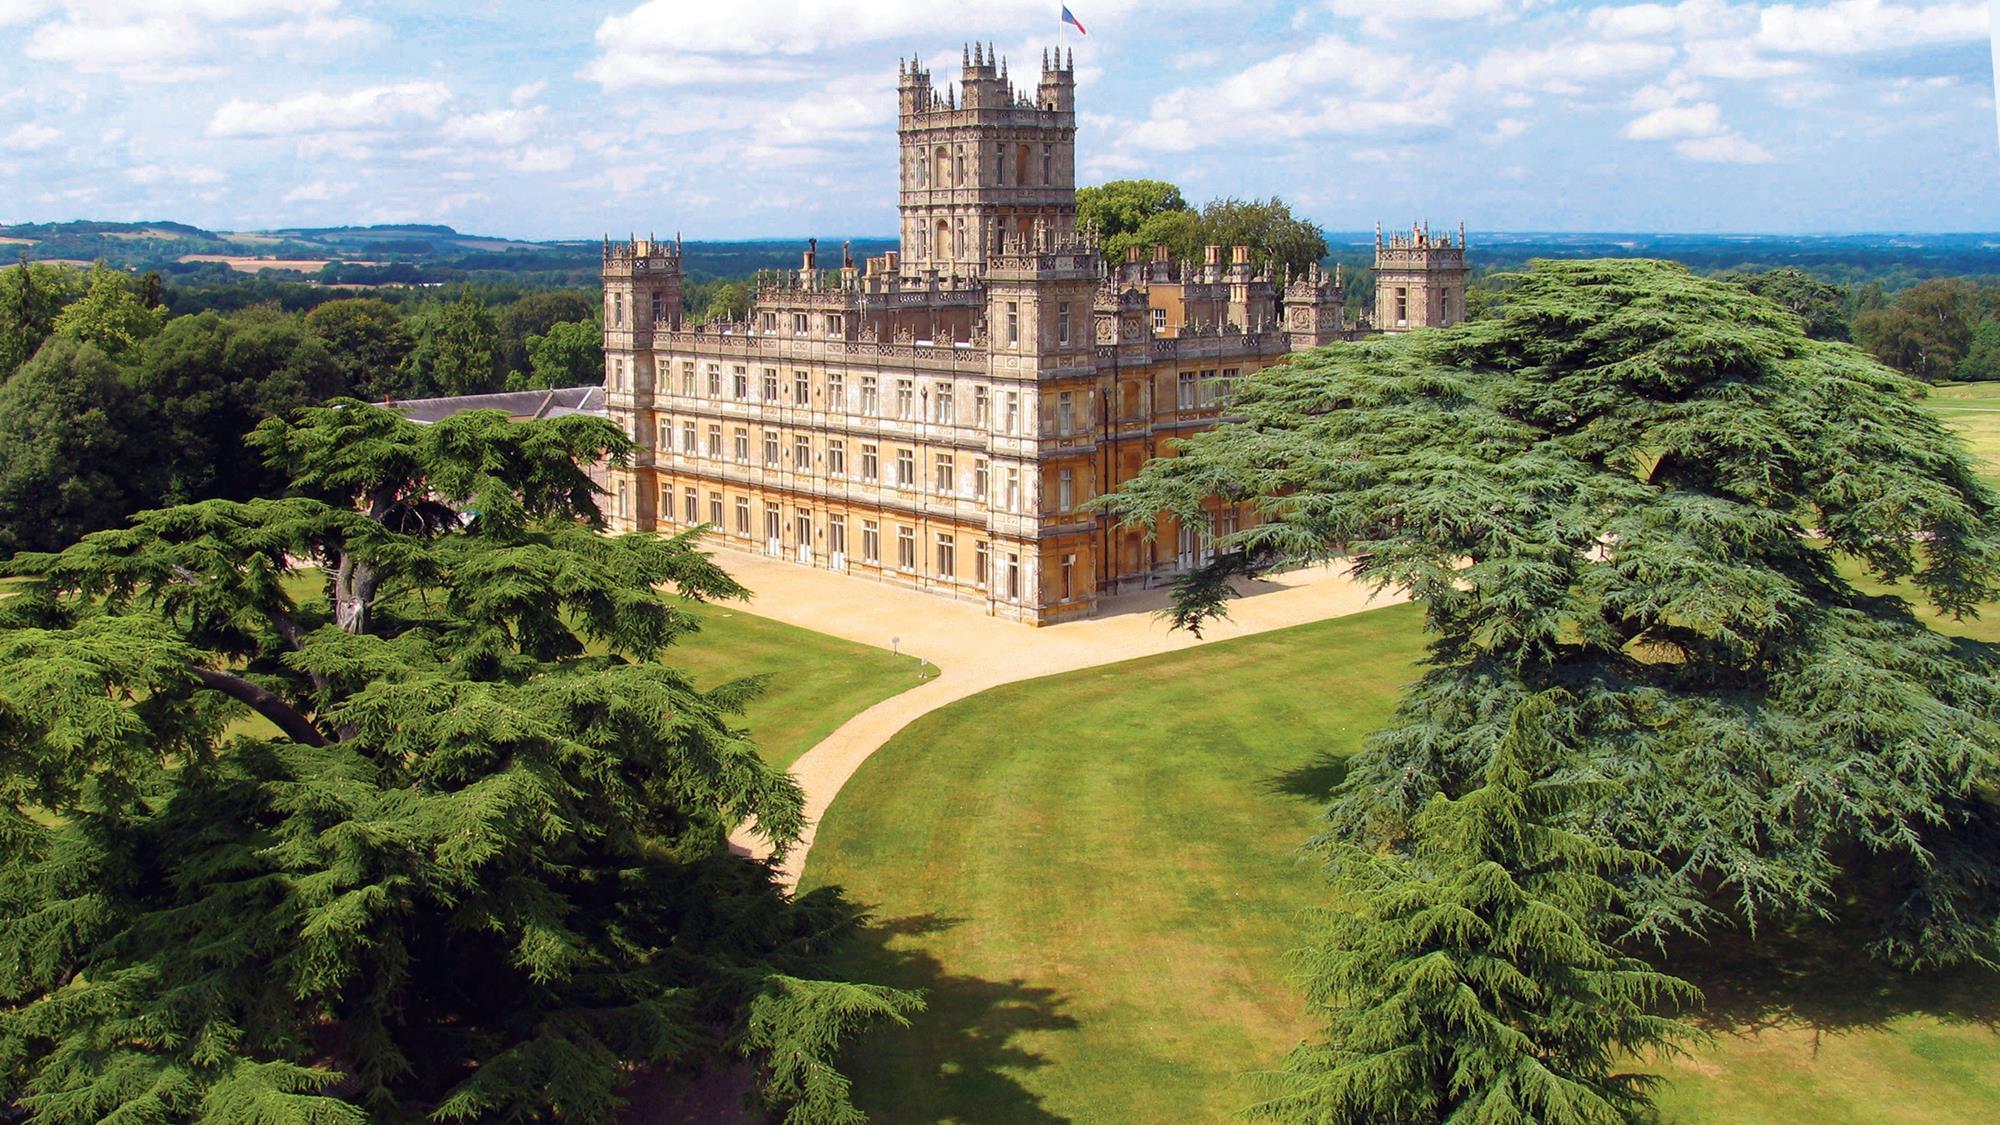 Filming locations linked to Downton Abbey which are great for groups